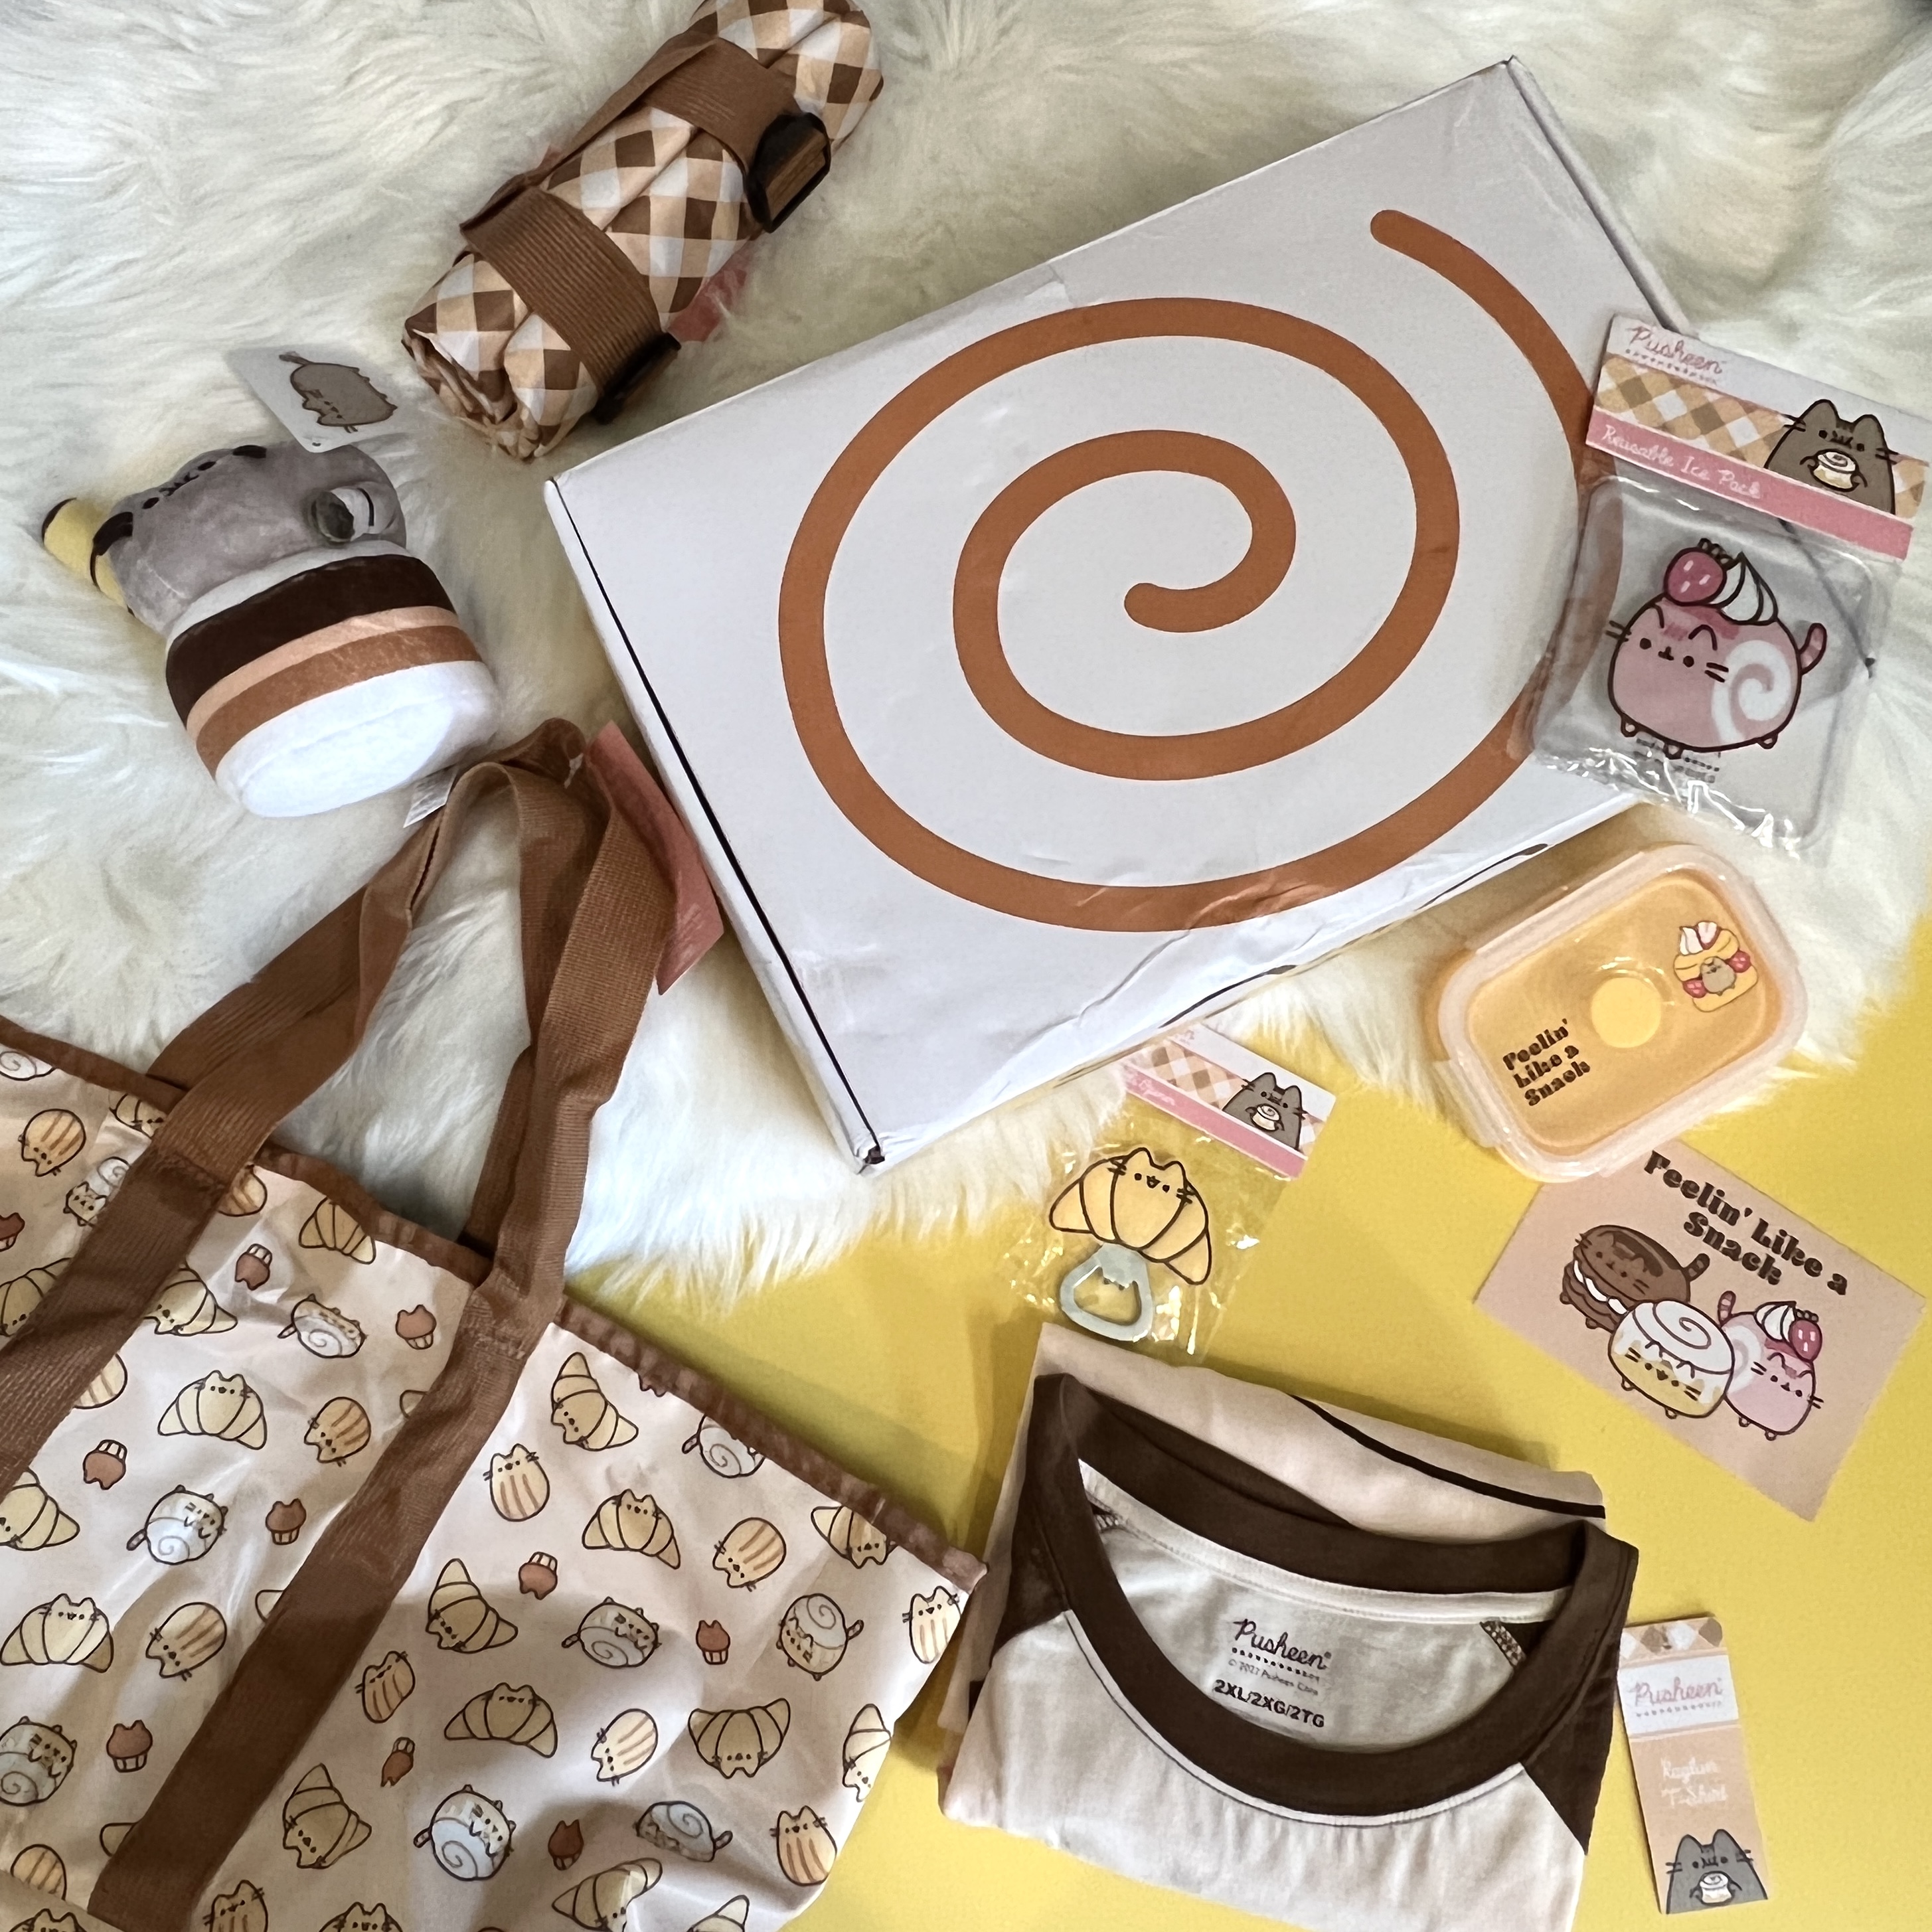 Pusheen Box Reviews: Everything You Need To Know